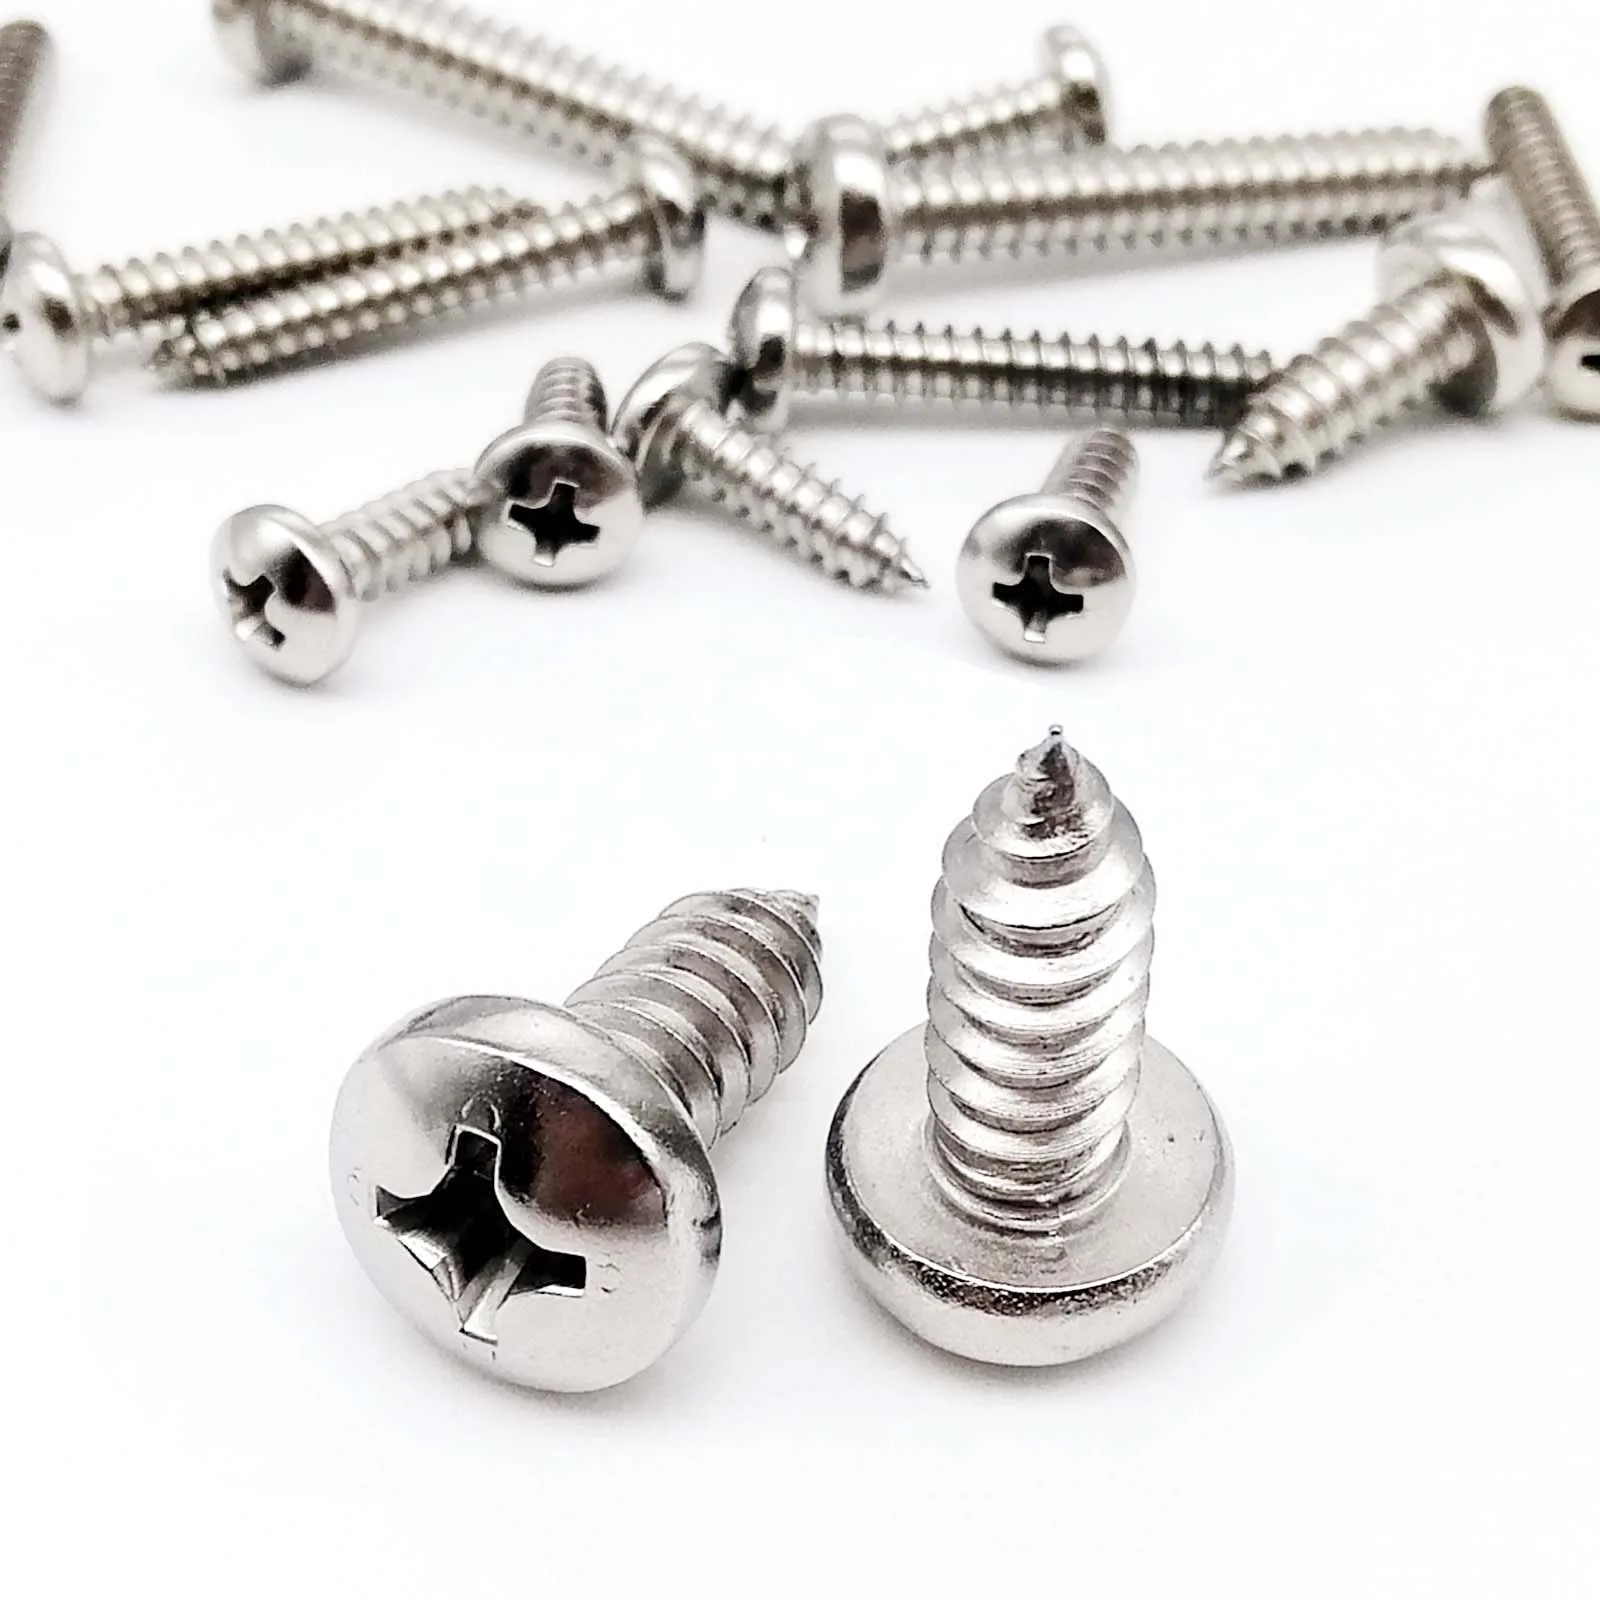 A2 Stainless Steel Round Washer Head Phillips Self-tapping Wood Screws M2-M4 